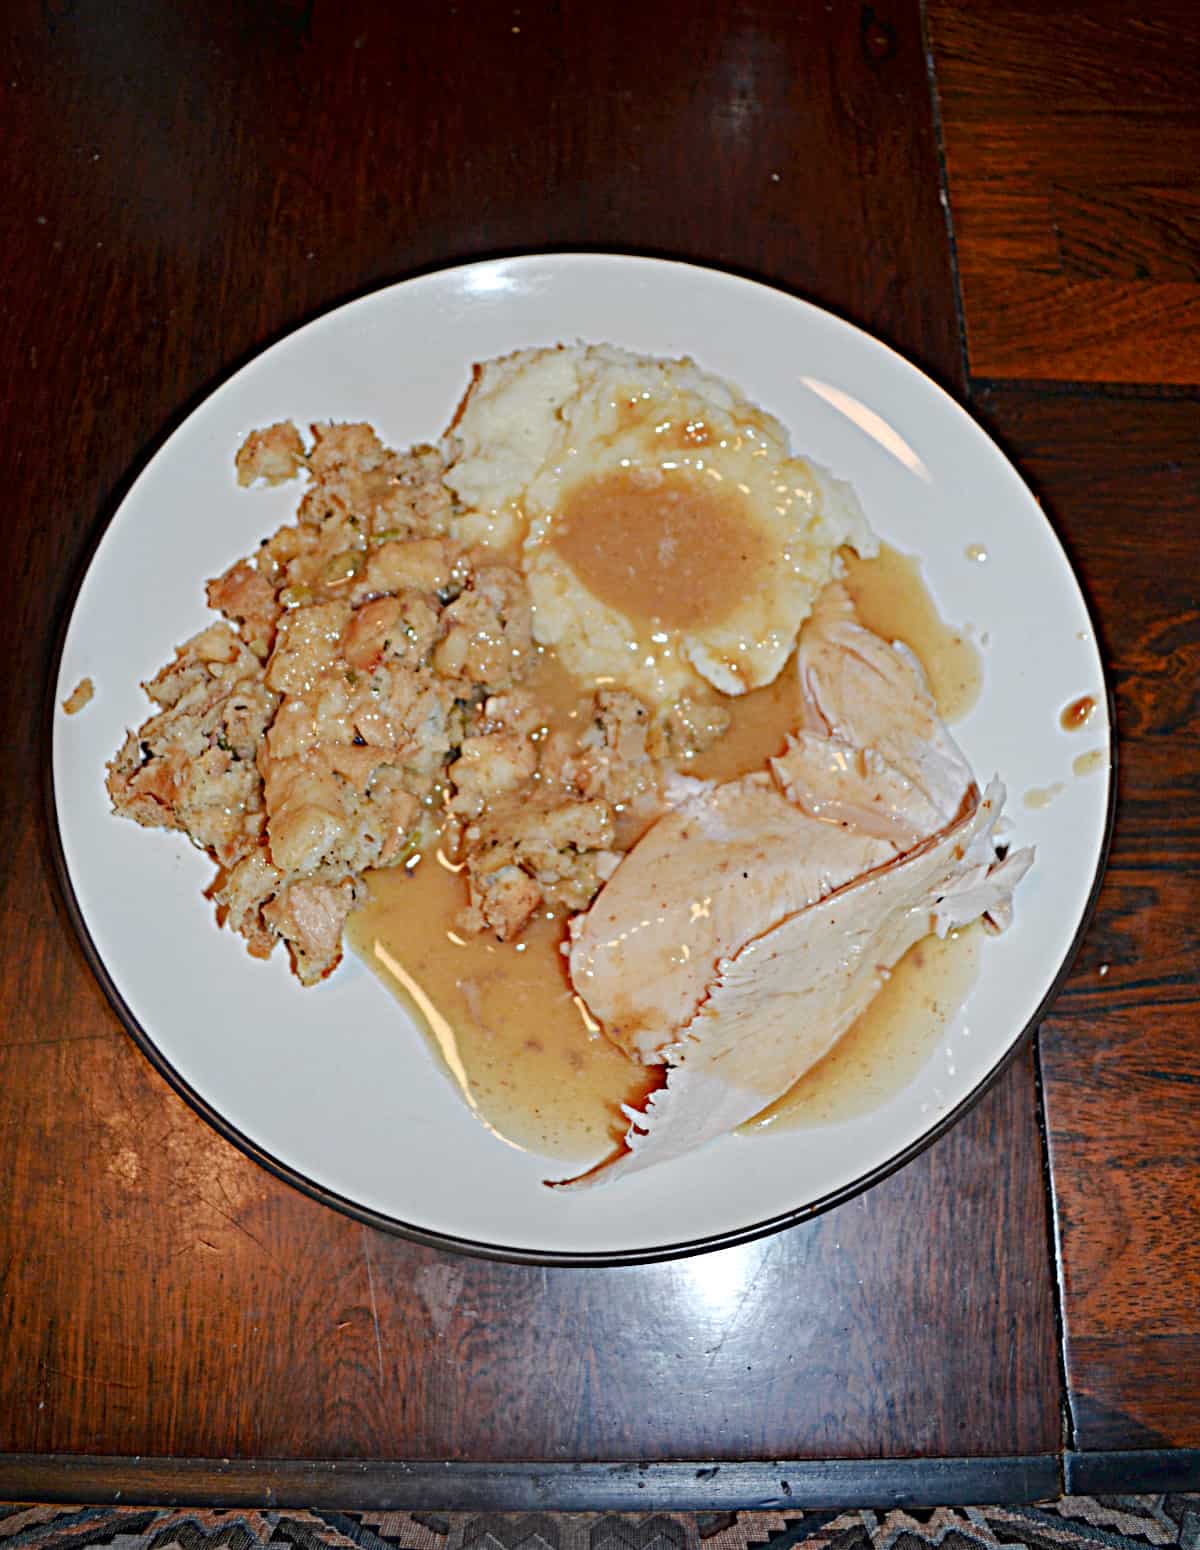 A plate with turkey, mashed potatoes, stuffing, and gravy on it.